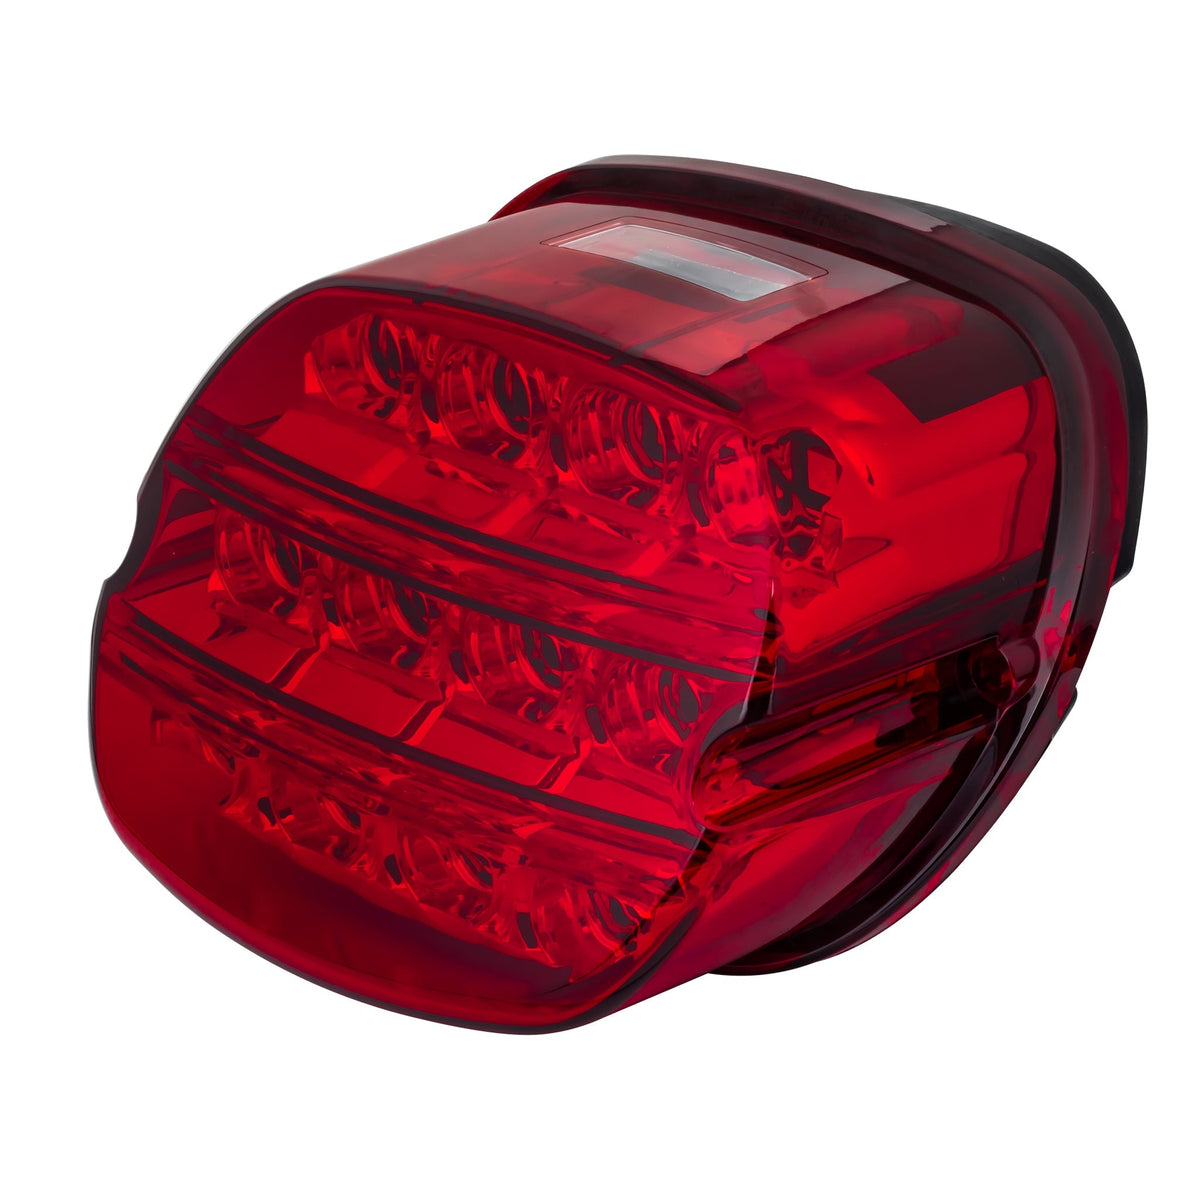 Eagle Lights Rear Layback LED Taillamp Replacement for Harley Davidson